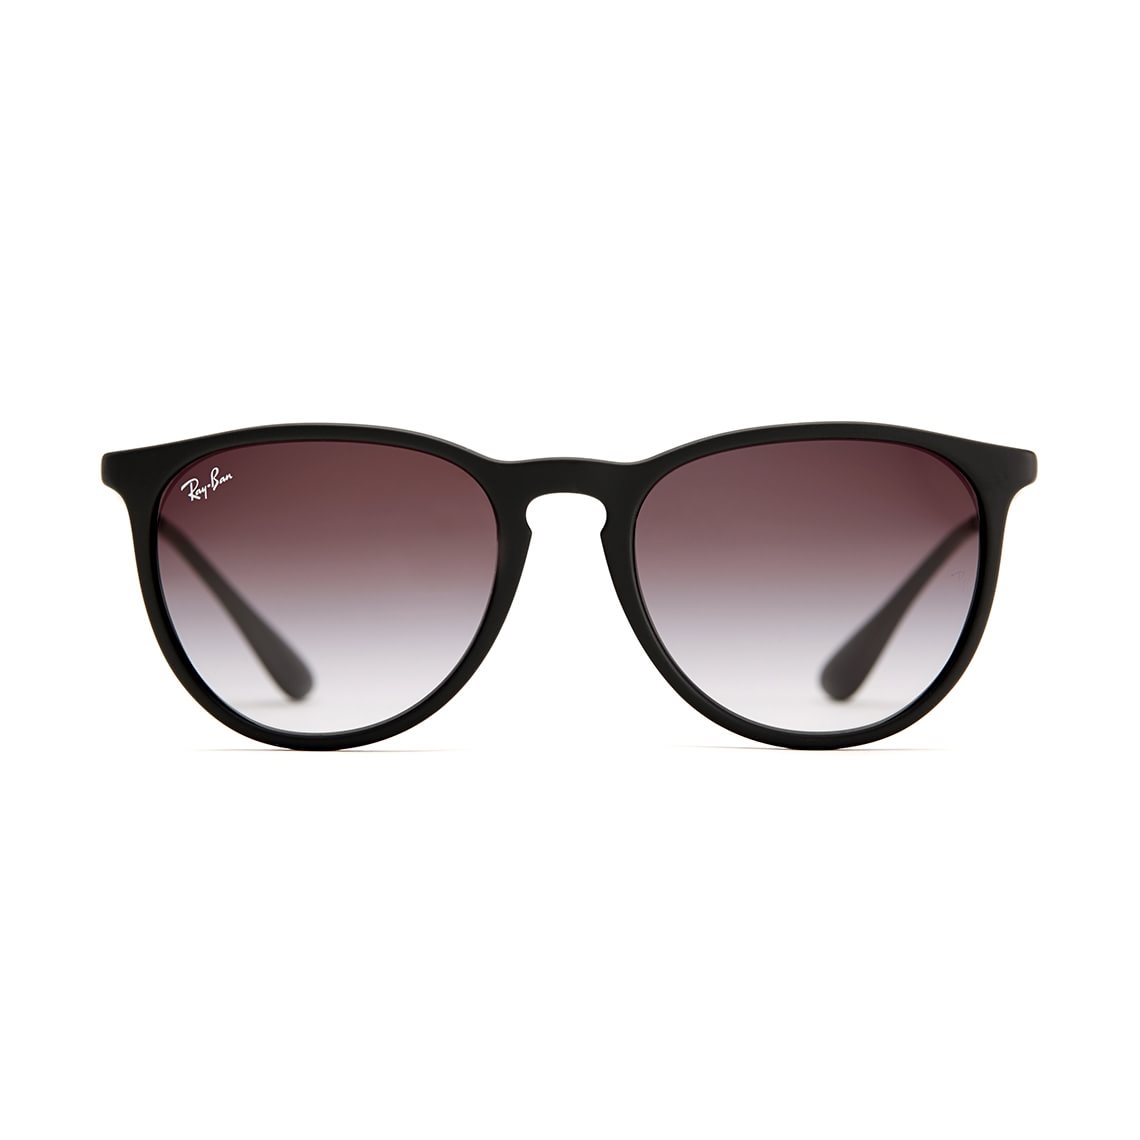 Ray-Ban Erika RB4171 622/8G 54 - Synsam